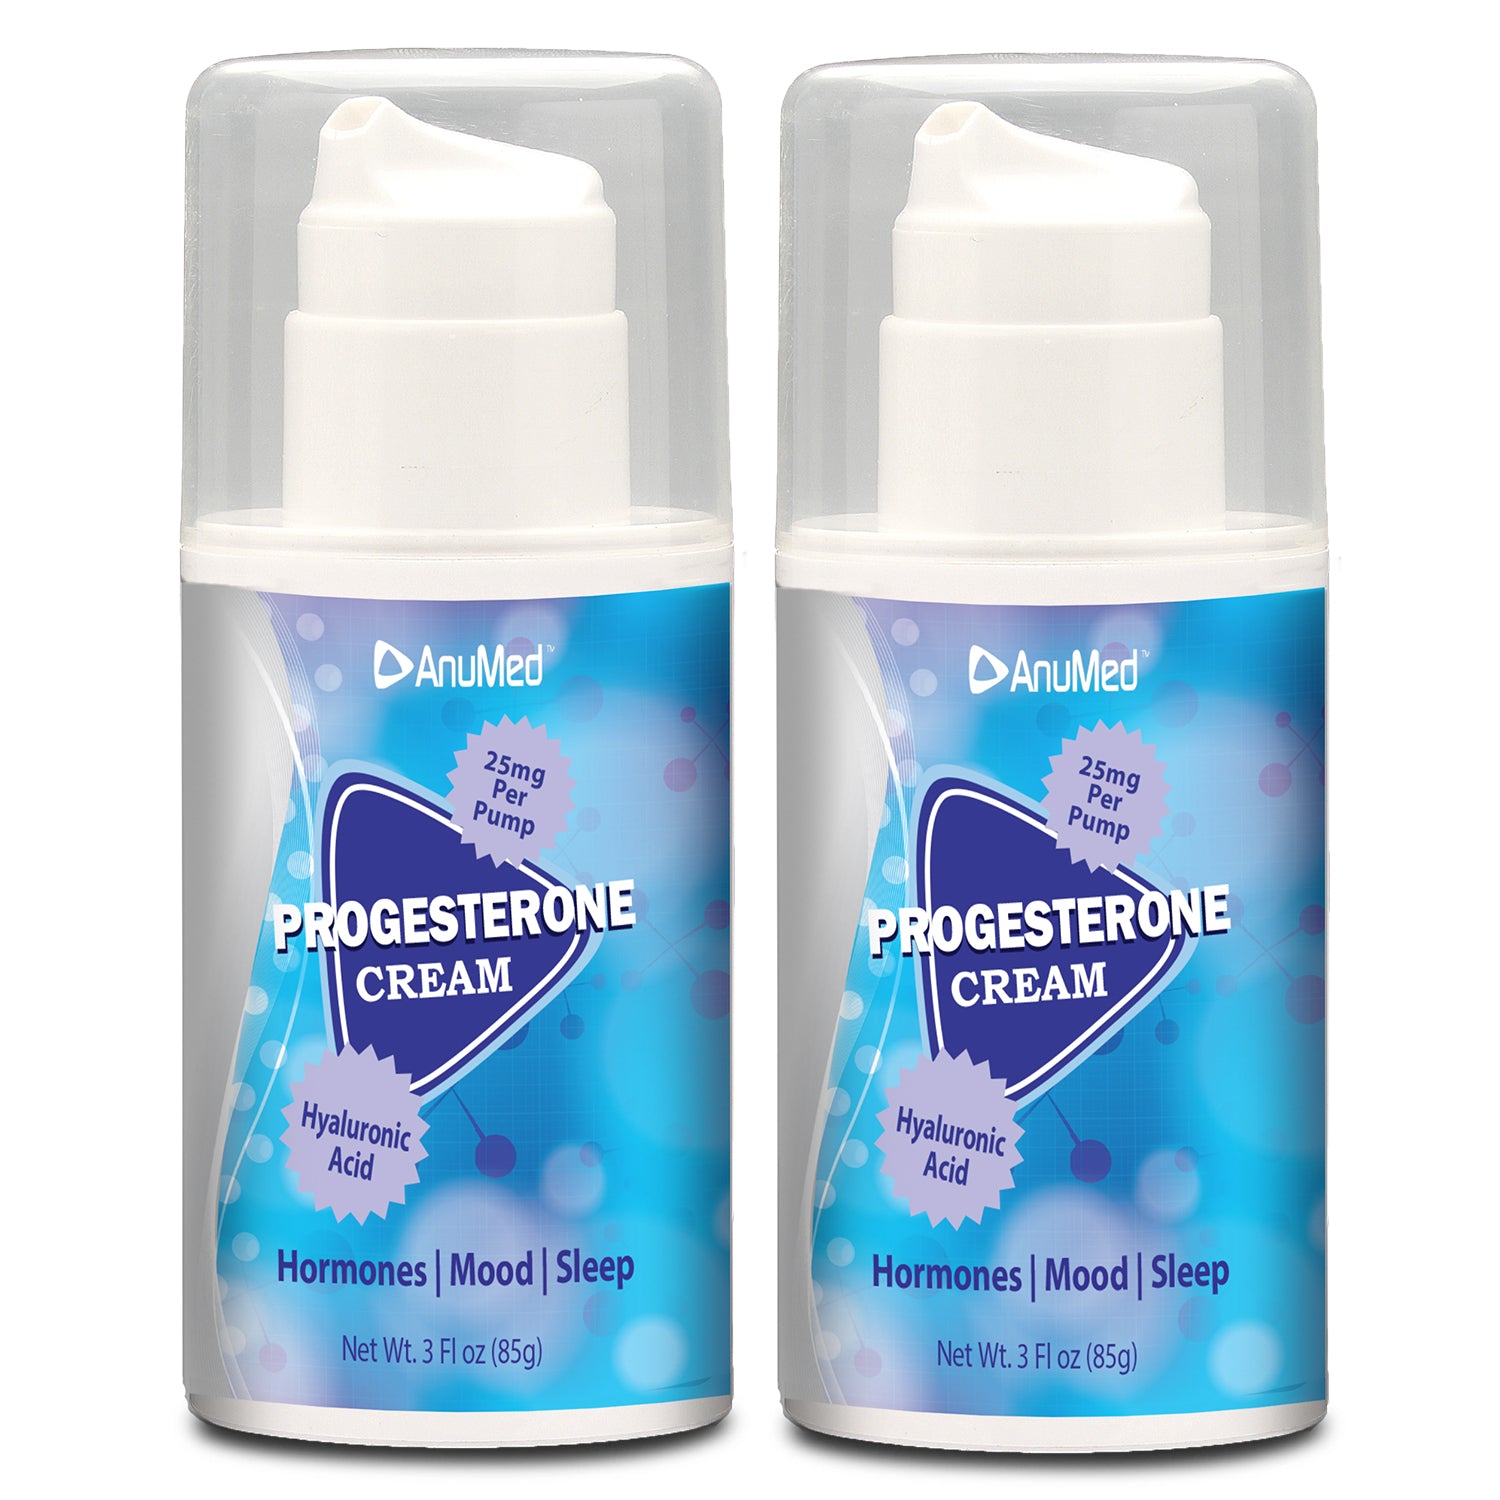 2 PACK - All Natural Bioidentical 3oz Progesterone Cream 25mg Per Pump + Hyaluronic Acid for Beautiful Skin Care During Menopause Relief. Balancing Cream for Mood Swings, Night Flashes, Night Sweat